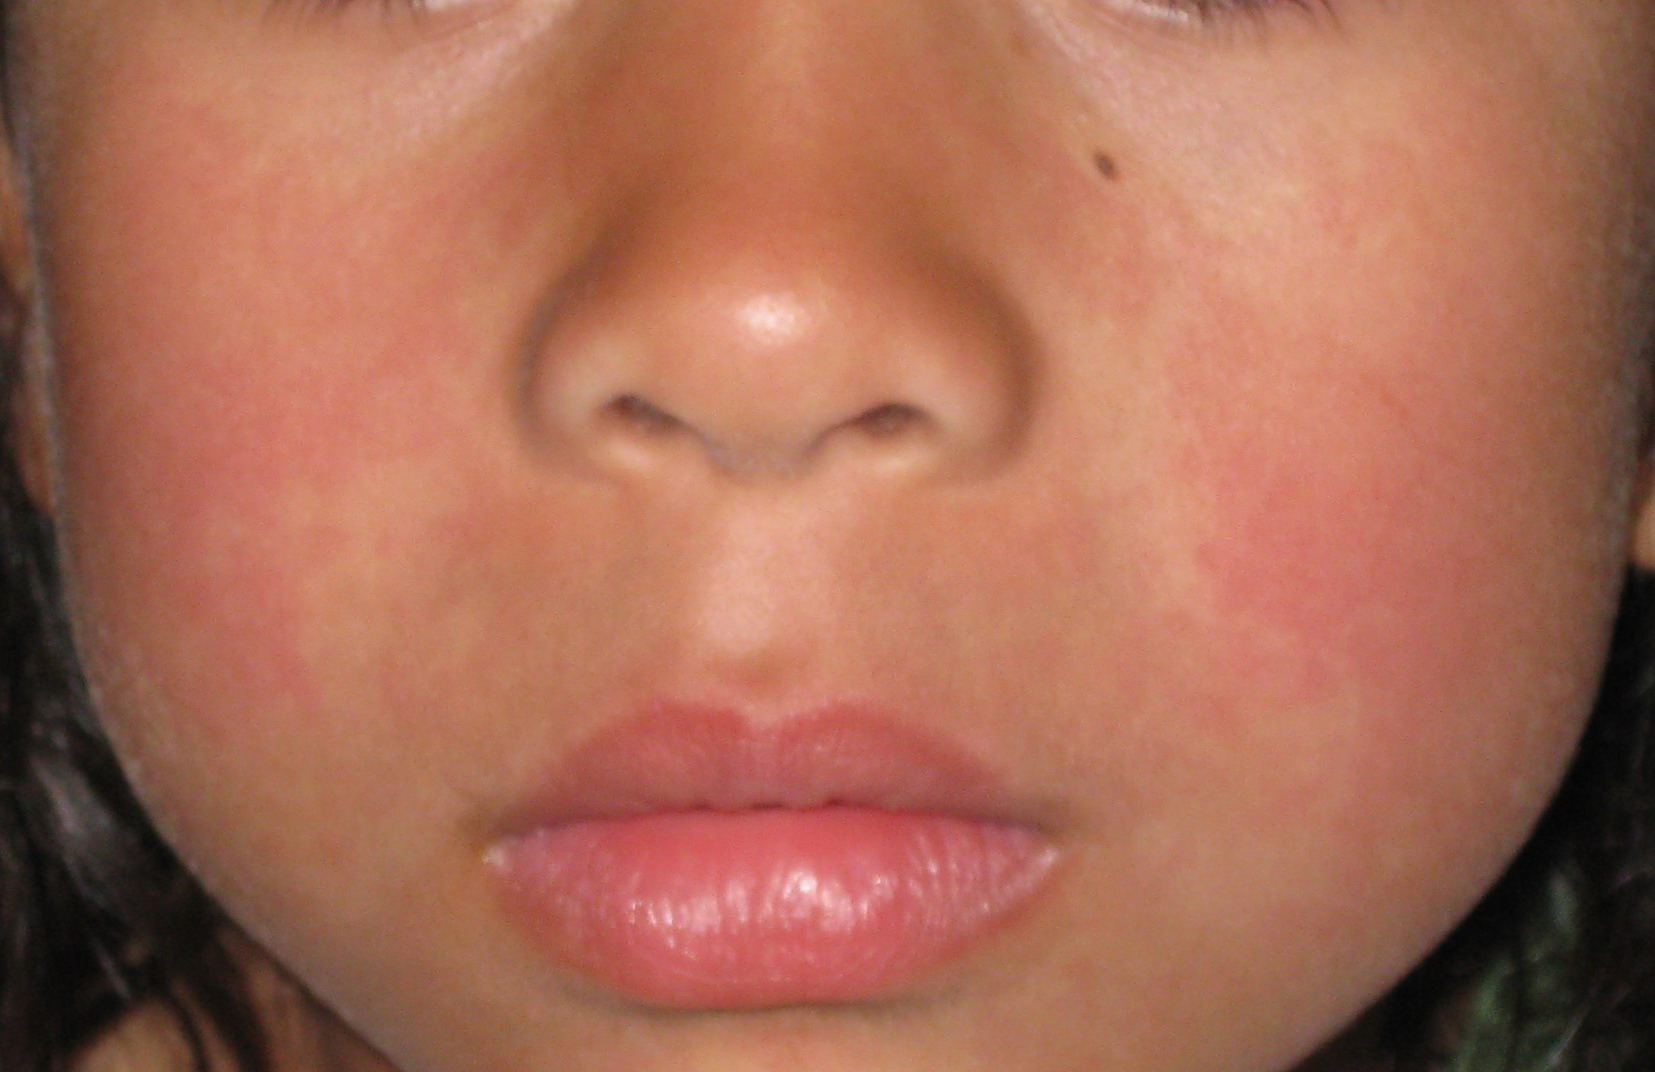 fifths disease rash pictures #11